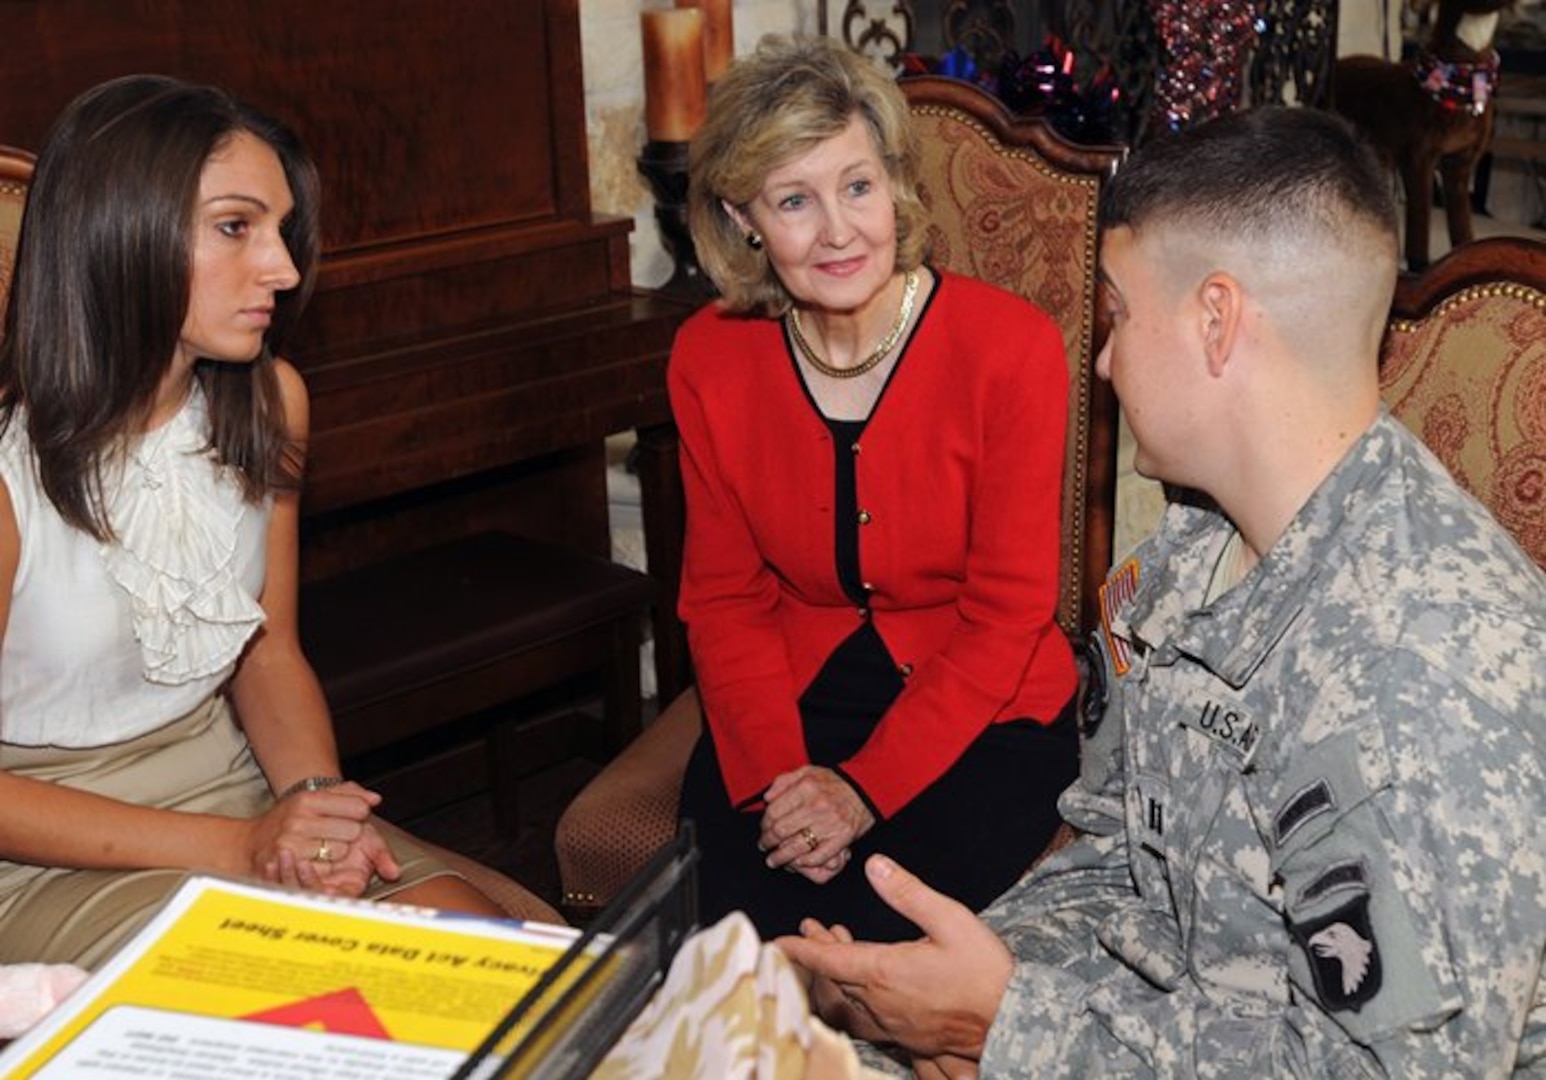 FORT SAM HOUSTON, Texas — Sen. Kay Bailey Hutchison of Texas (center) meets with Capt. Larkin O’Hern, a triple-amputee, and his wife, Rachael, during a July 2 visit to the Warrior and Family Support Center. O’Hern, who is working as a planner at U.S. Army North, told the senator about his desire to work in the Army Congressional Fellowship program. O’Hern was injured after an improvised-explosive device detonated while he was conducting a dismounted patrol in Kandahar, Afghanistan, New Year’s Eve 2010. (U.S. Army photo by Staff Sgt. Keith Anderson, Army North PAO)